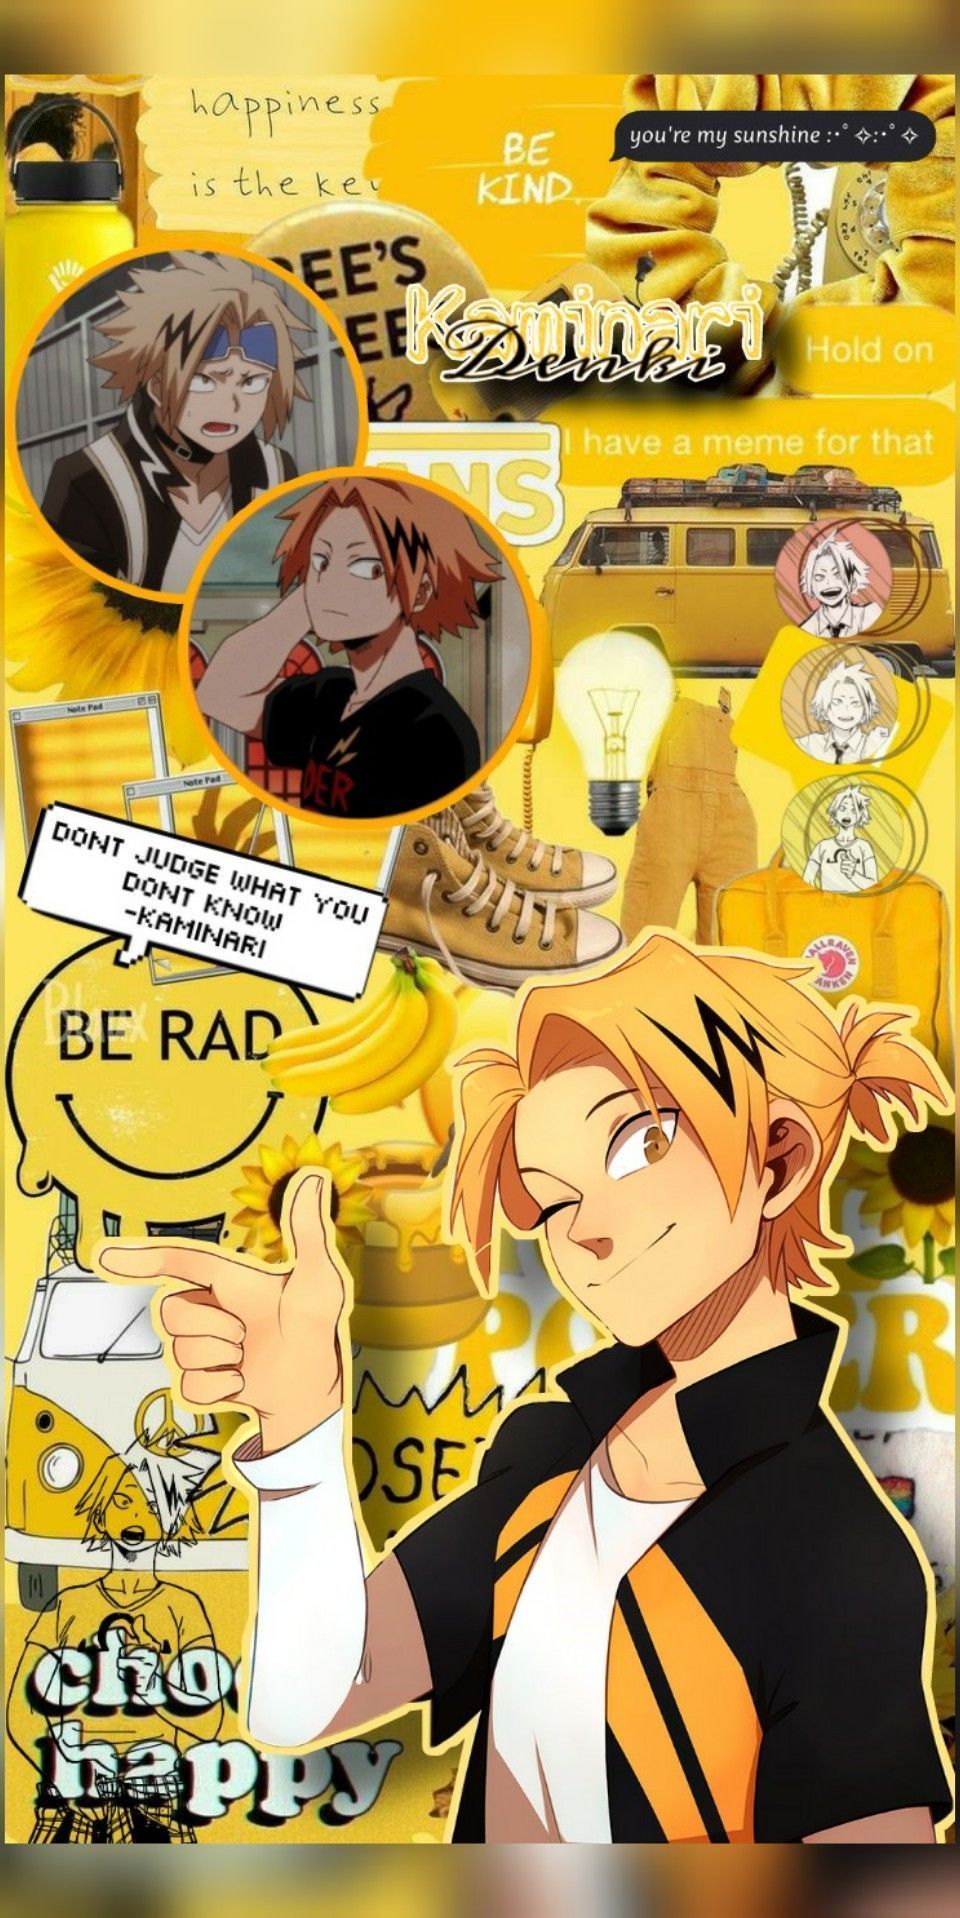 Aesthetic background of yellow with pictures of Kaminari and quotes - Denki Kaminari